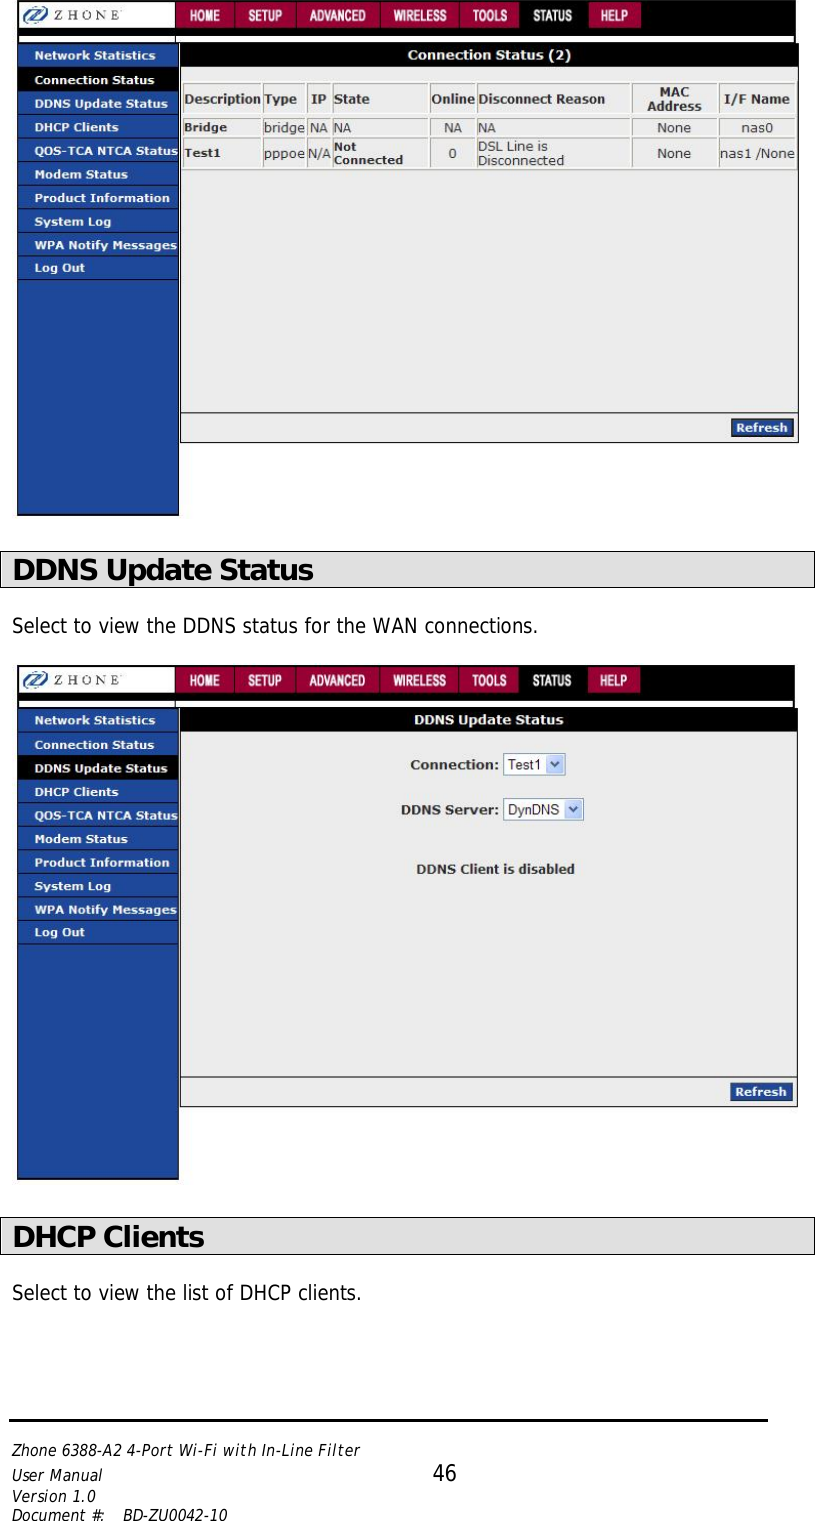   Zhone 6388-A2 4-Port Wi-Fi with In-Line Filter User Manual 46 Version 1.0 Document #:  BD-ZU0042-10     DDNS Update Status  Select to view the DDNS status for the WAN connections.    DHCP Clients  Select to view the list of DHCP clients.  